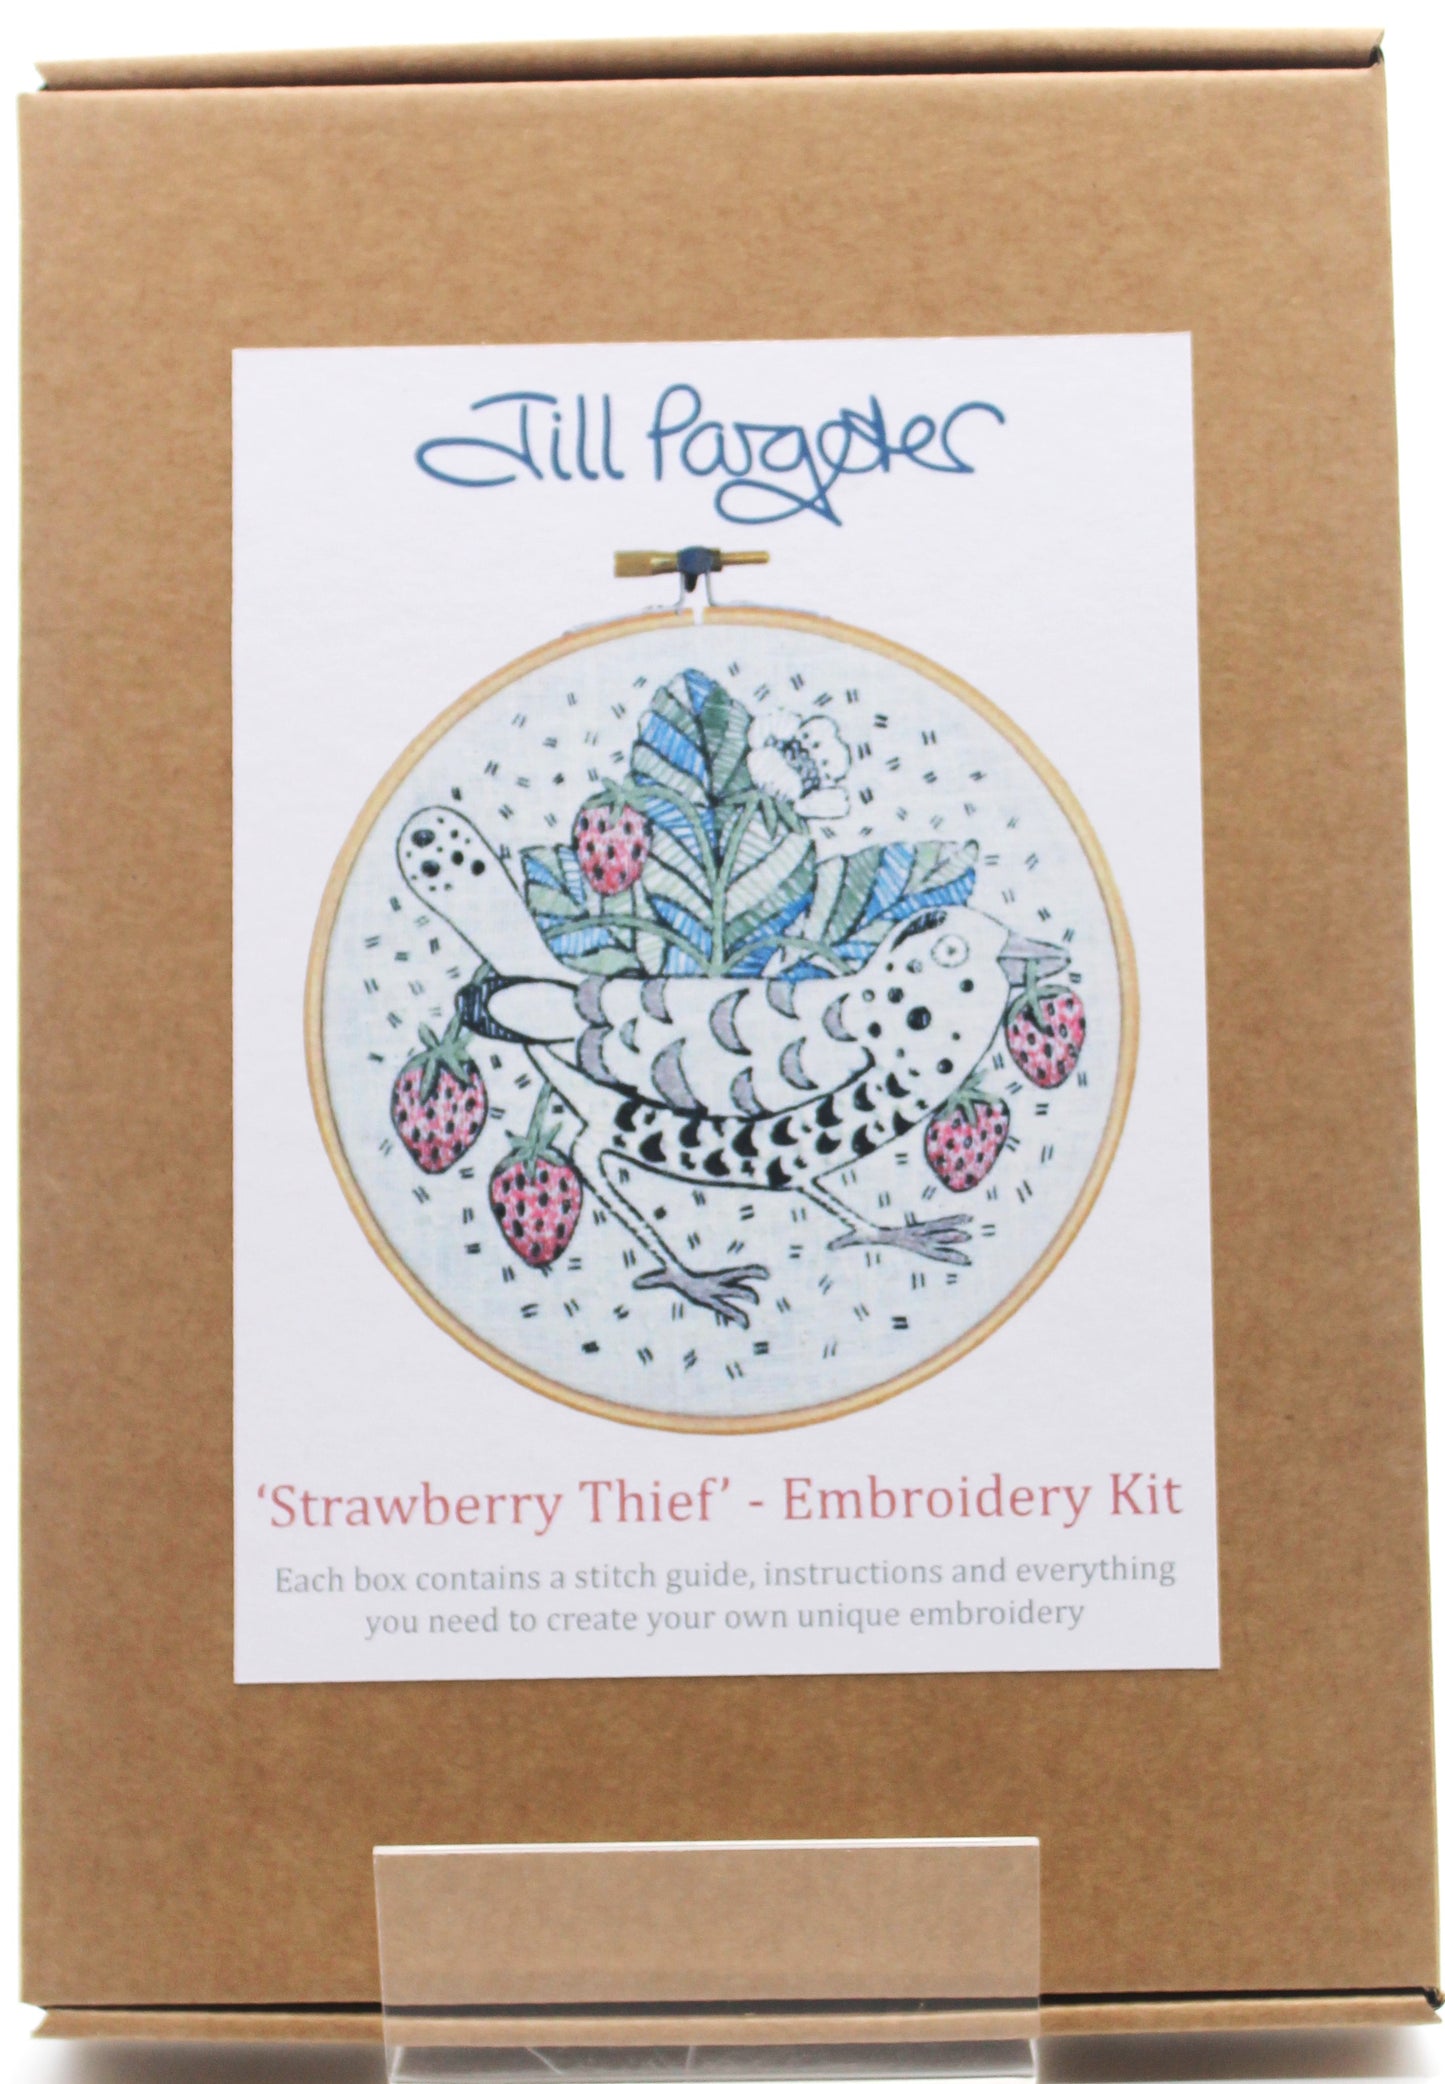 Embroidery kit - Strawberry Thief